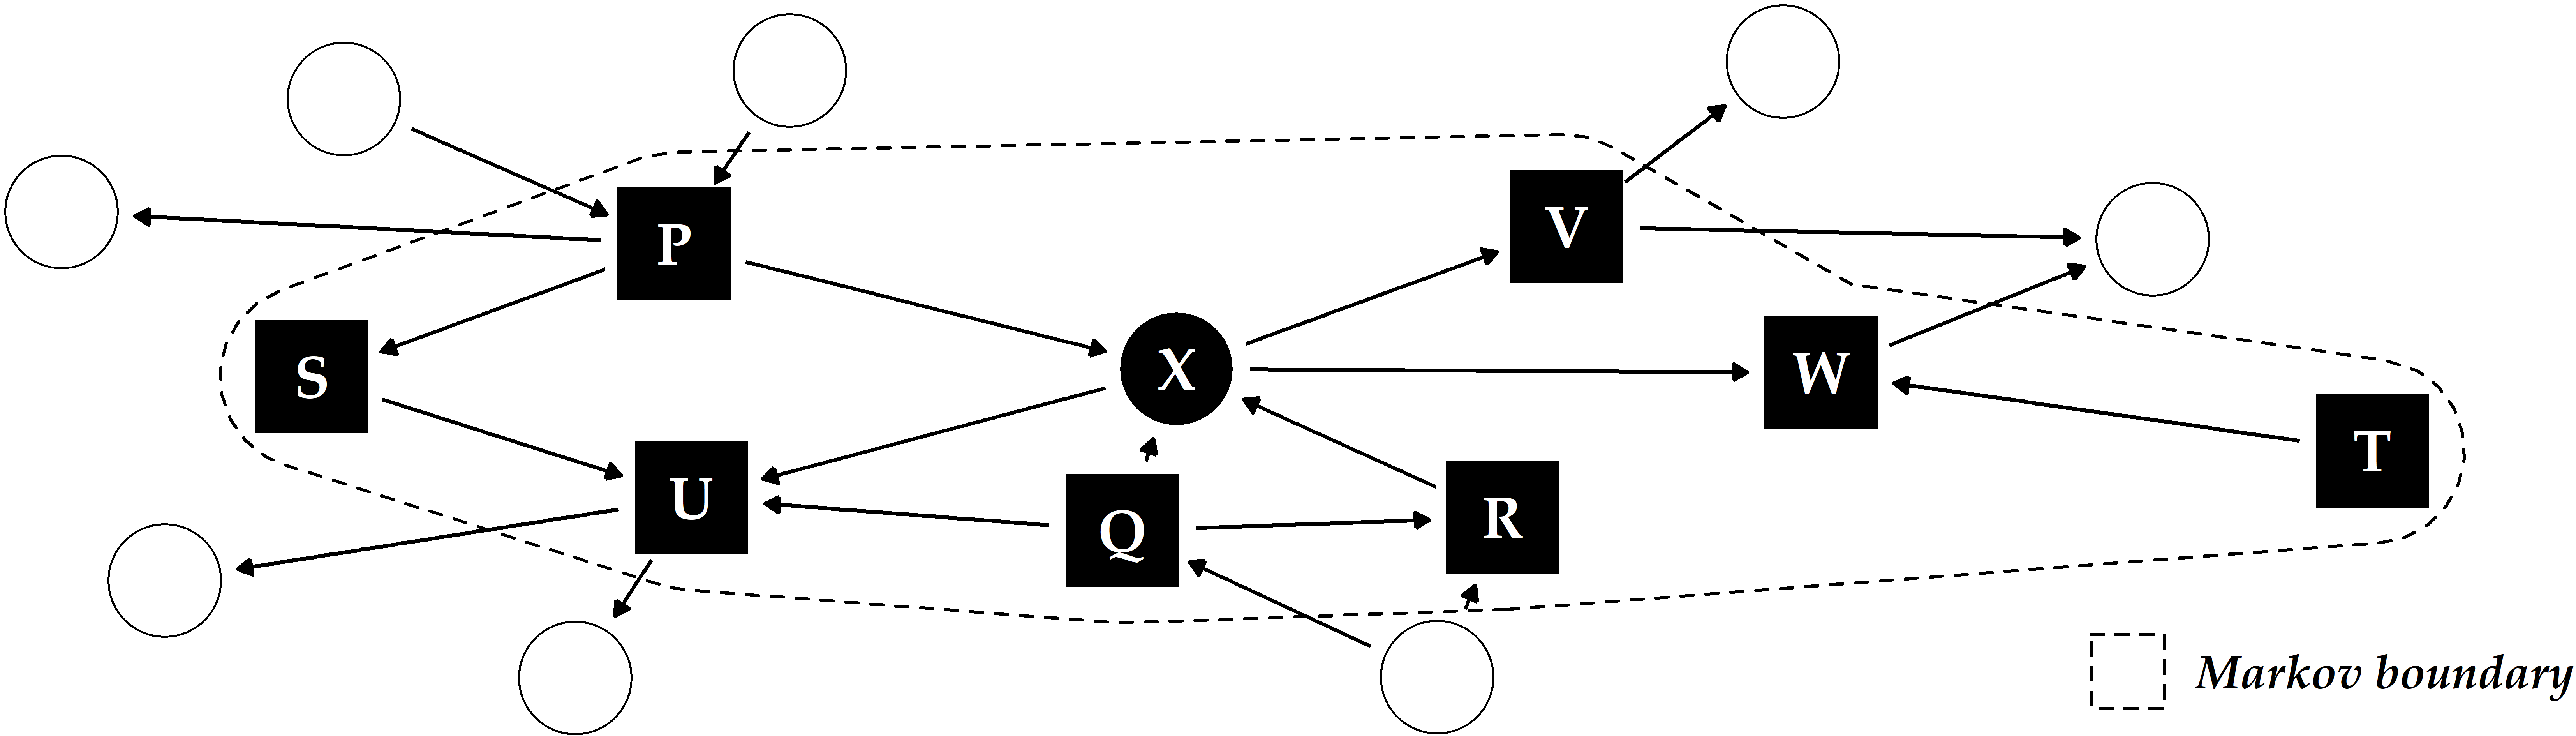 Illustrative example of a directed acyclic graph and Markov boundary for the target X. The other labeled variables P-W constitute the Markov boundary of X, consisting of its parents, children and any additional parents of its children (“spouses”).